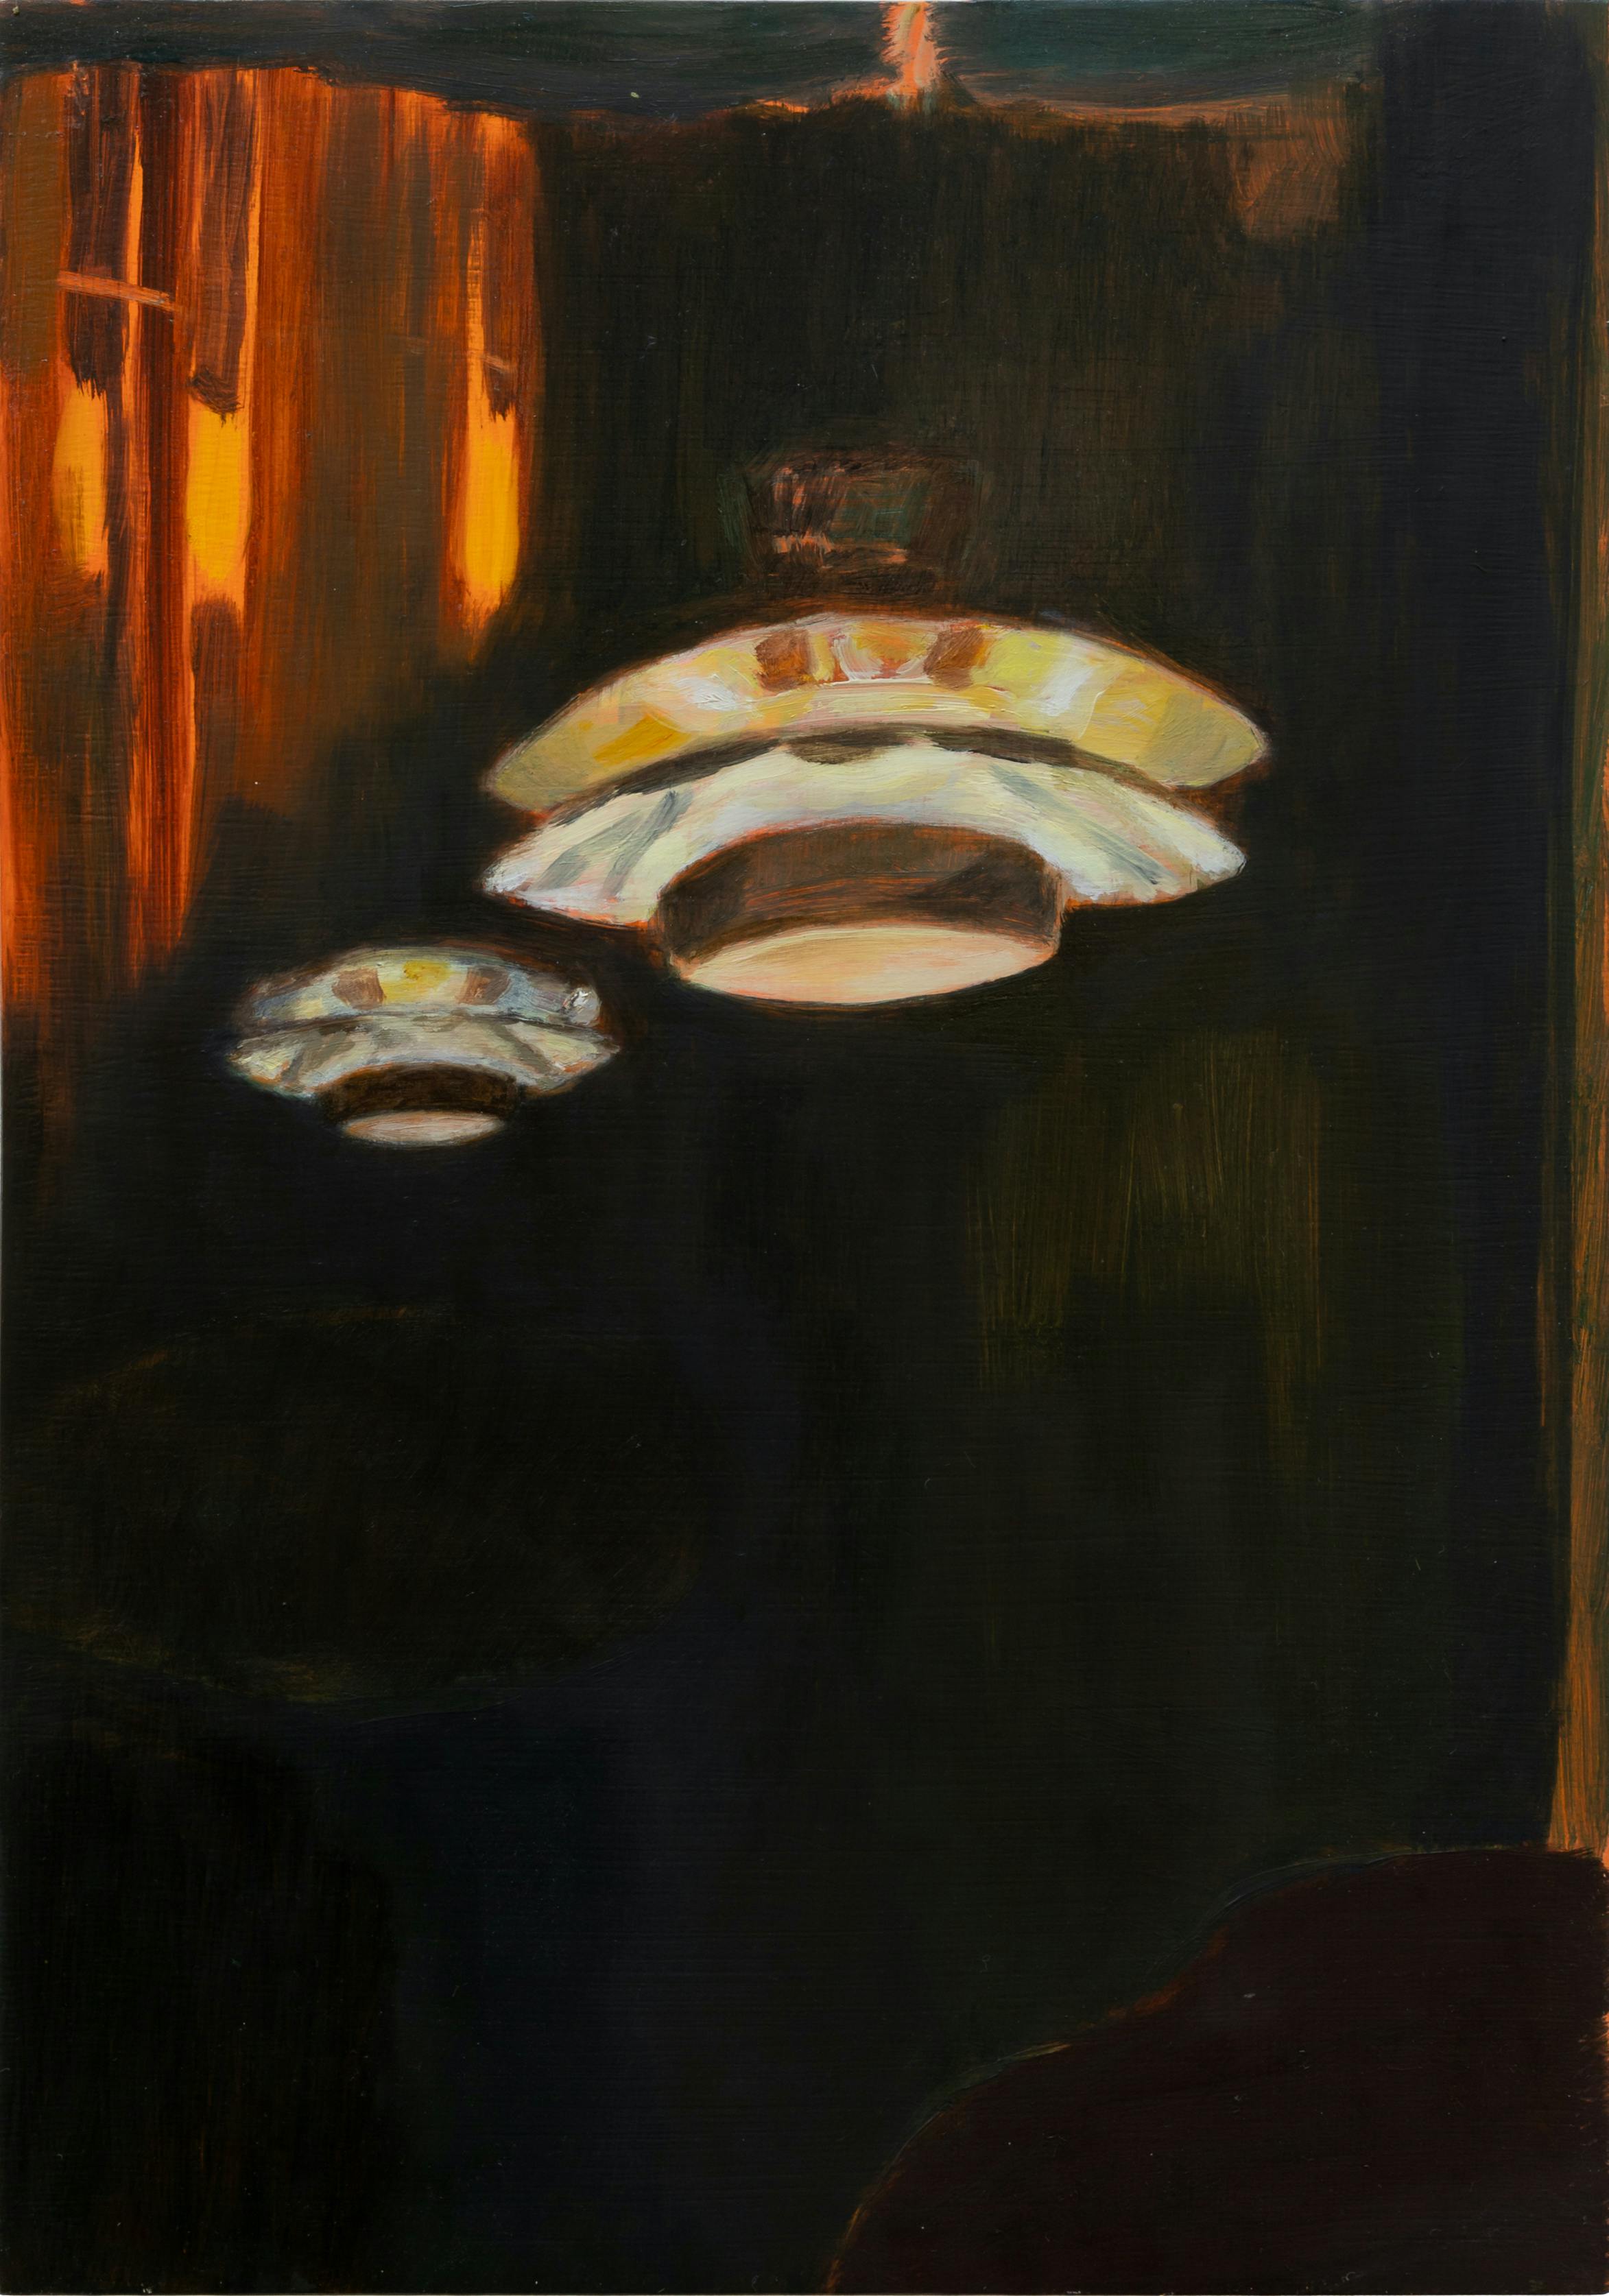 Two Lamps, 2020. Oil on board, 20 x 27.5cm